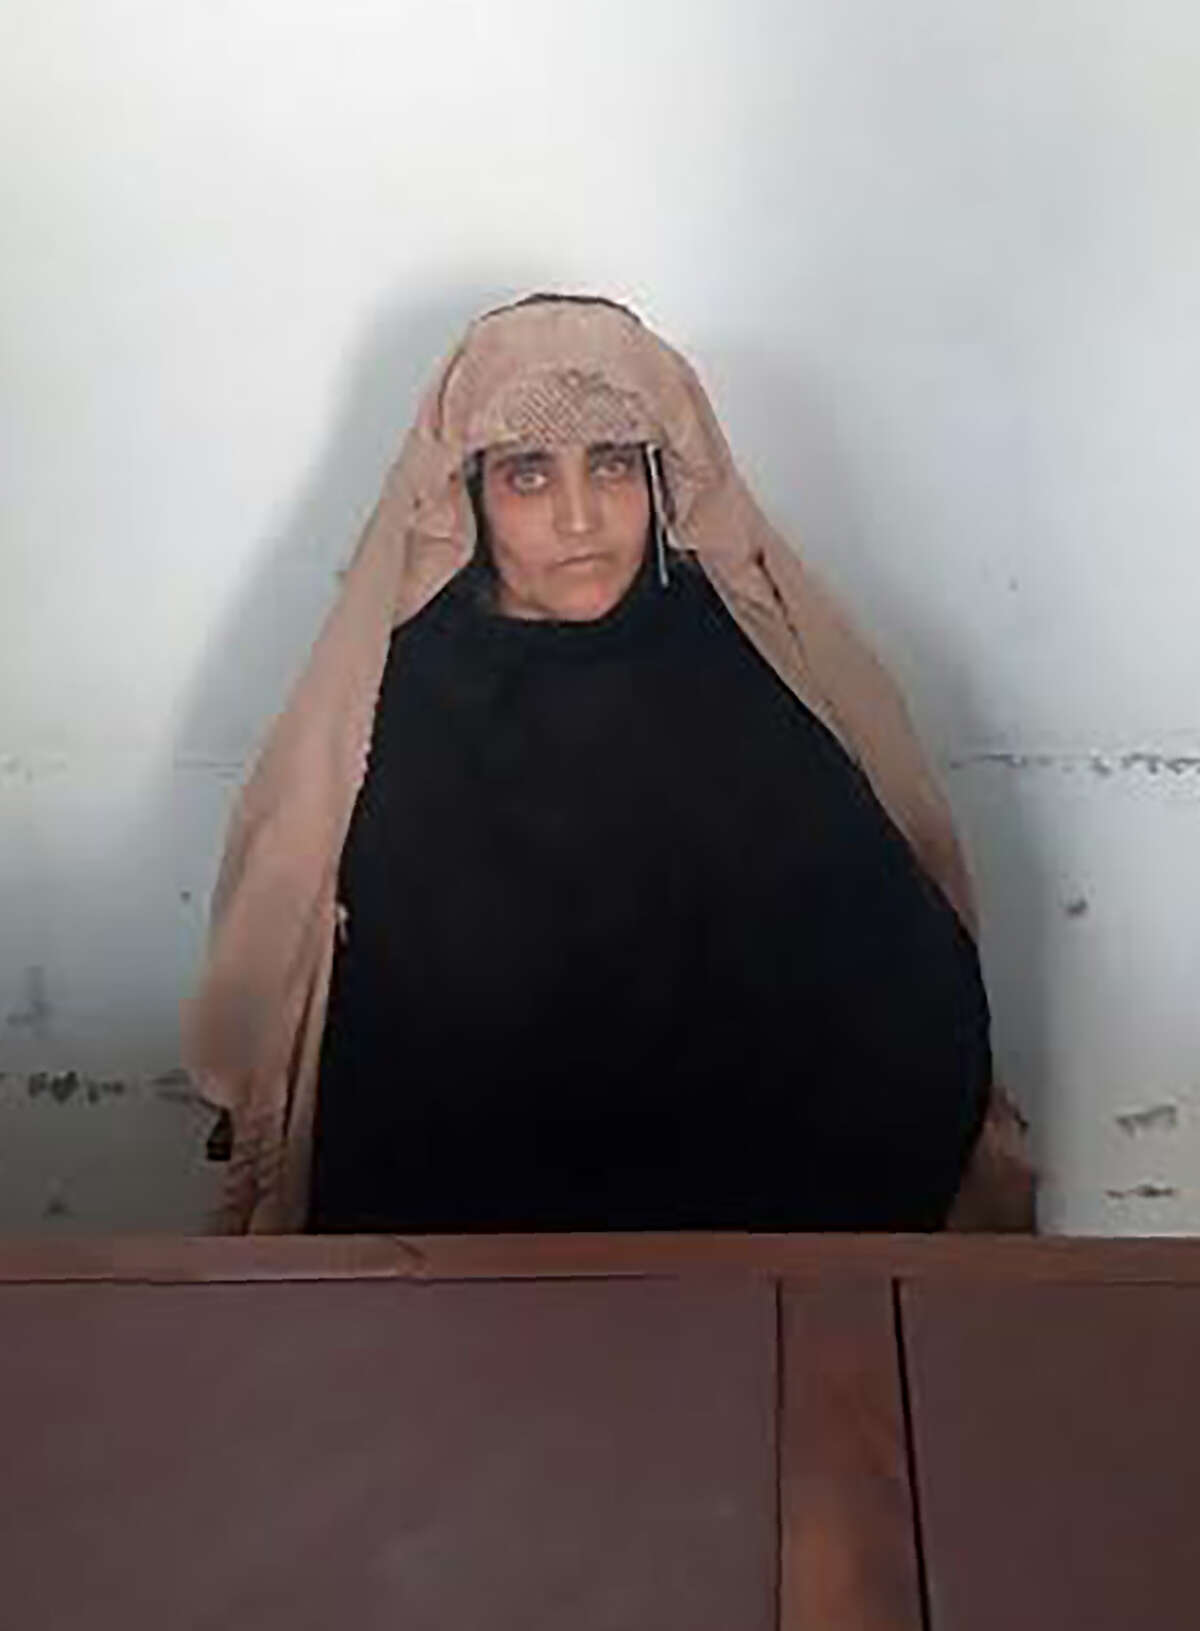 At left, Sharbat Gula in her iconic 1984 photo. At right, Gula is shown on Wednesday after her arrest in Pakistan on ID fraud charges.